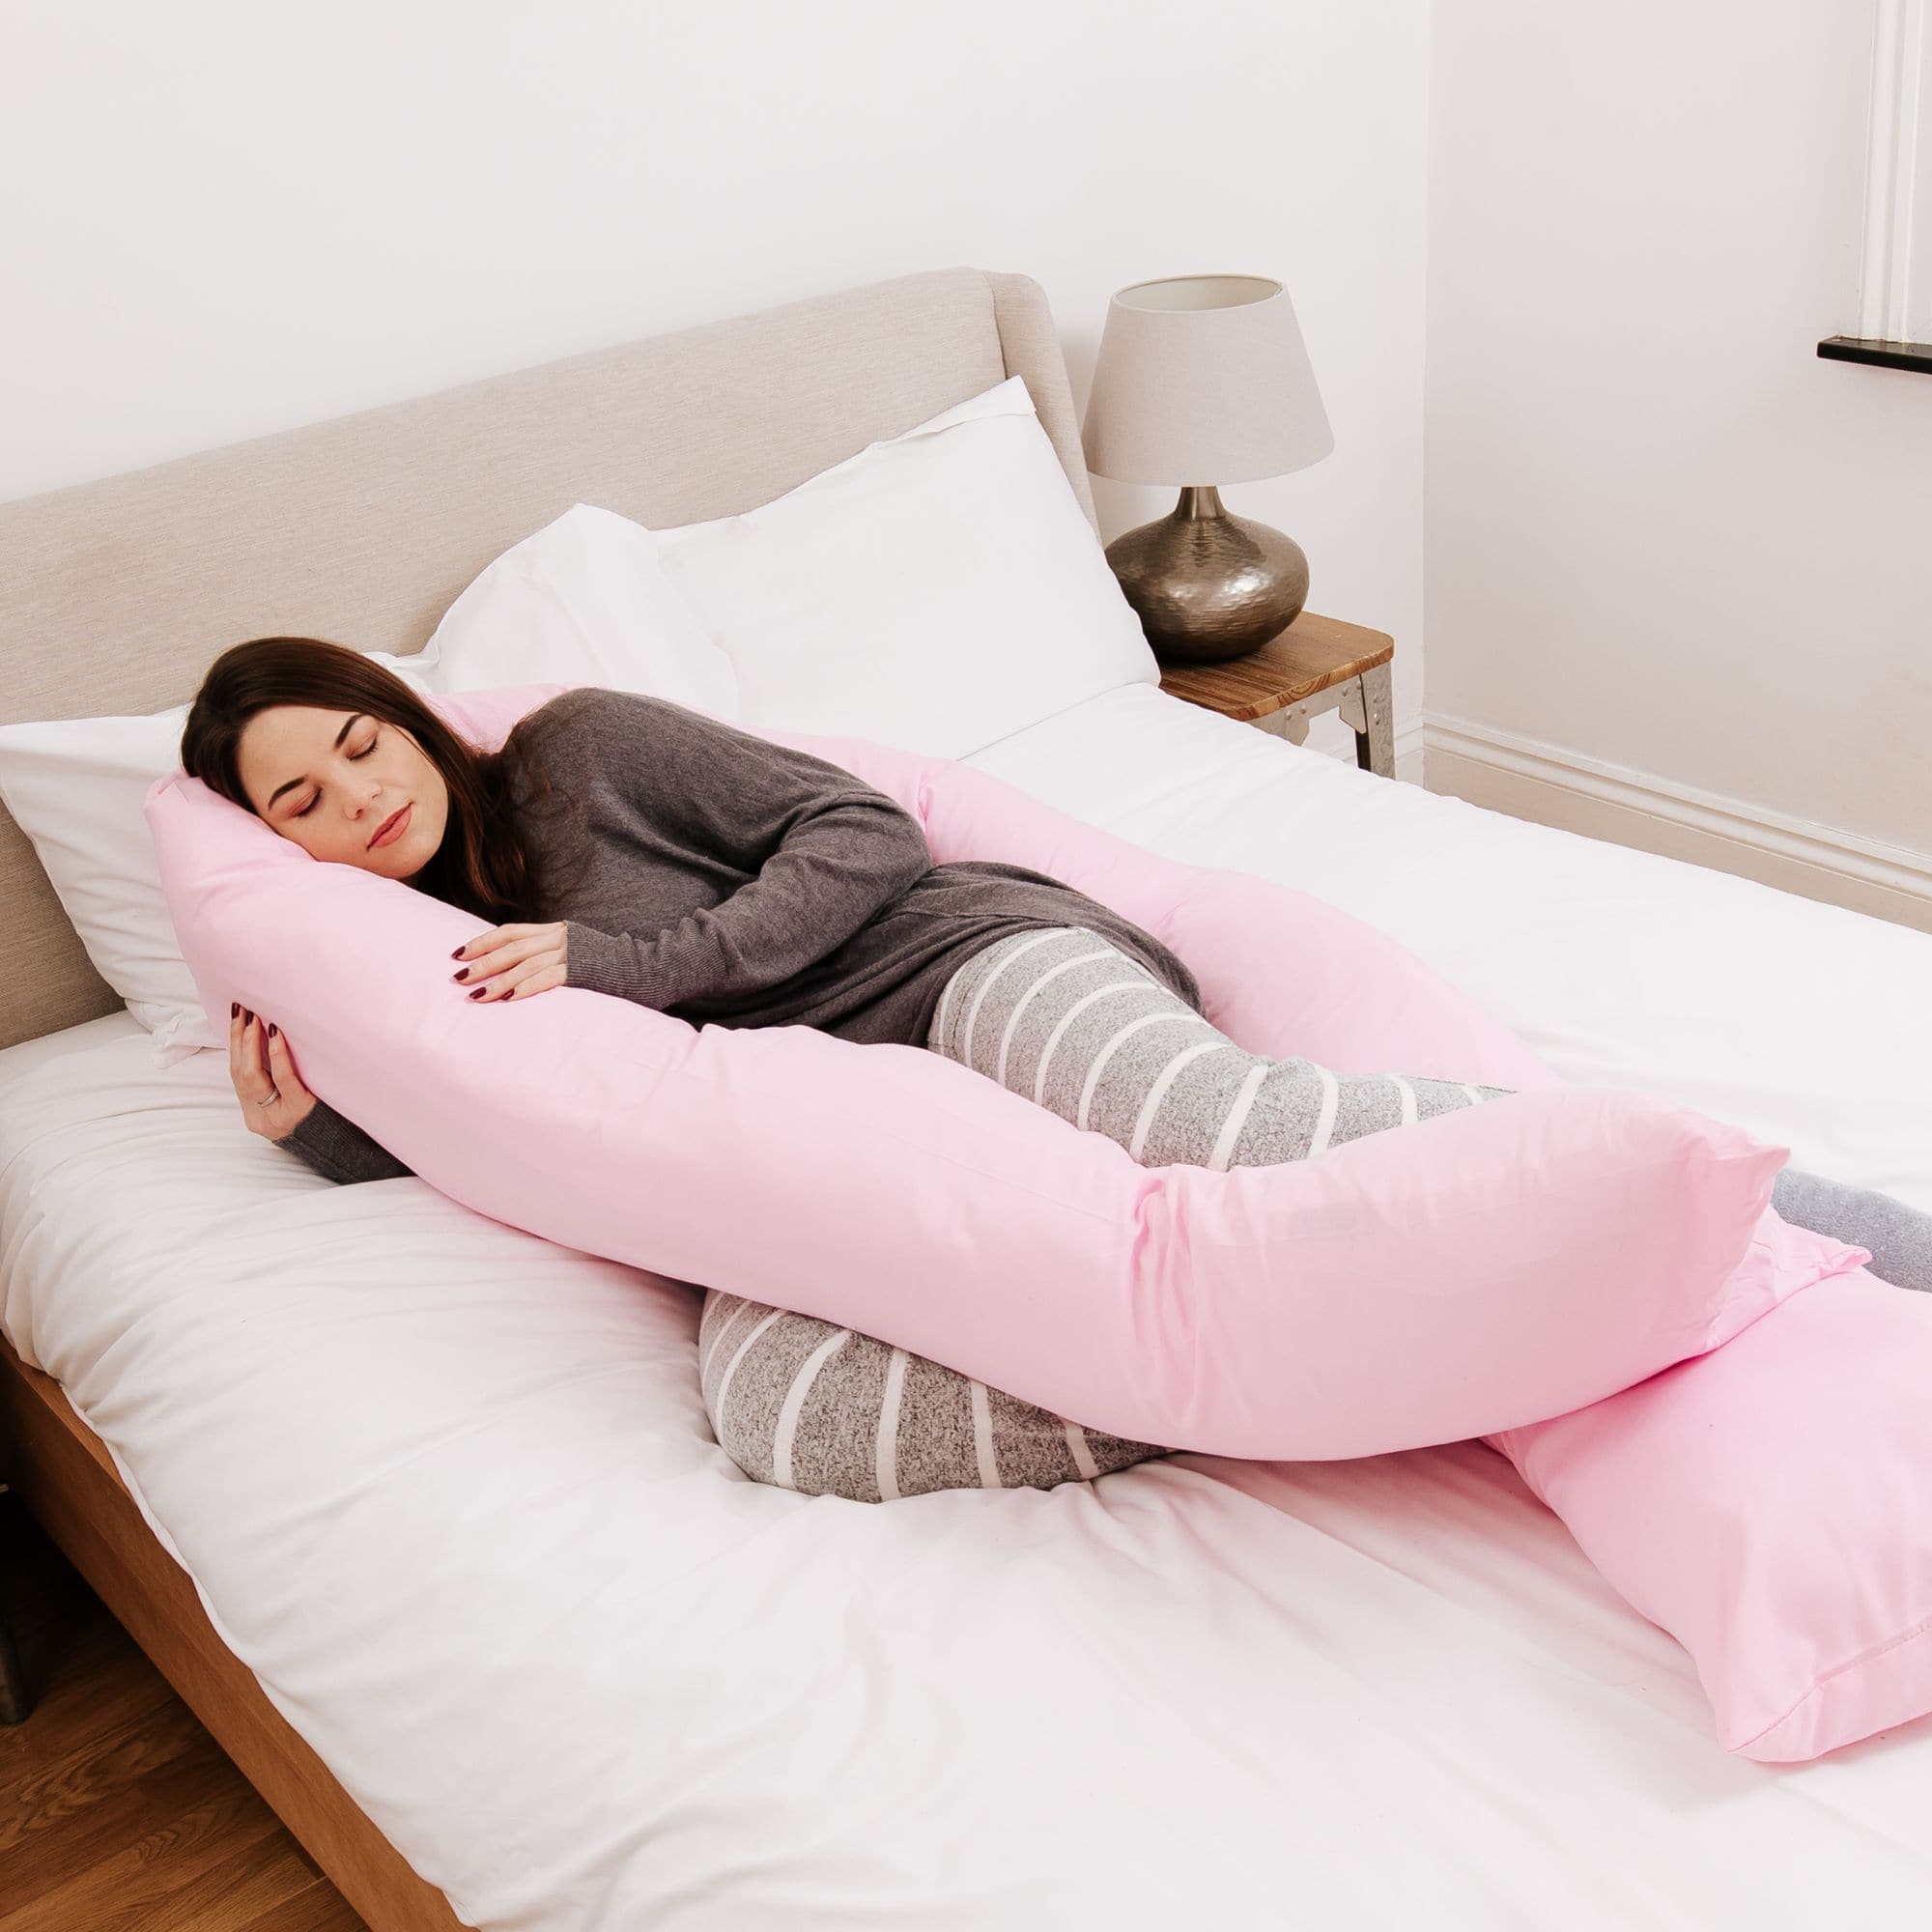 9 Ft Maternity Pillow And Case - Light Pink - For Your Little One